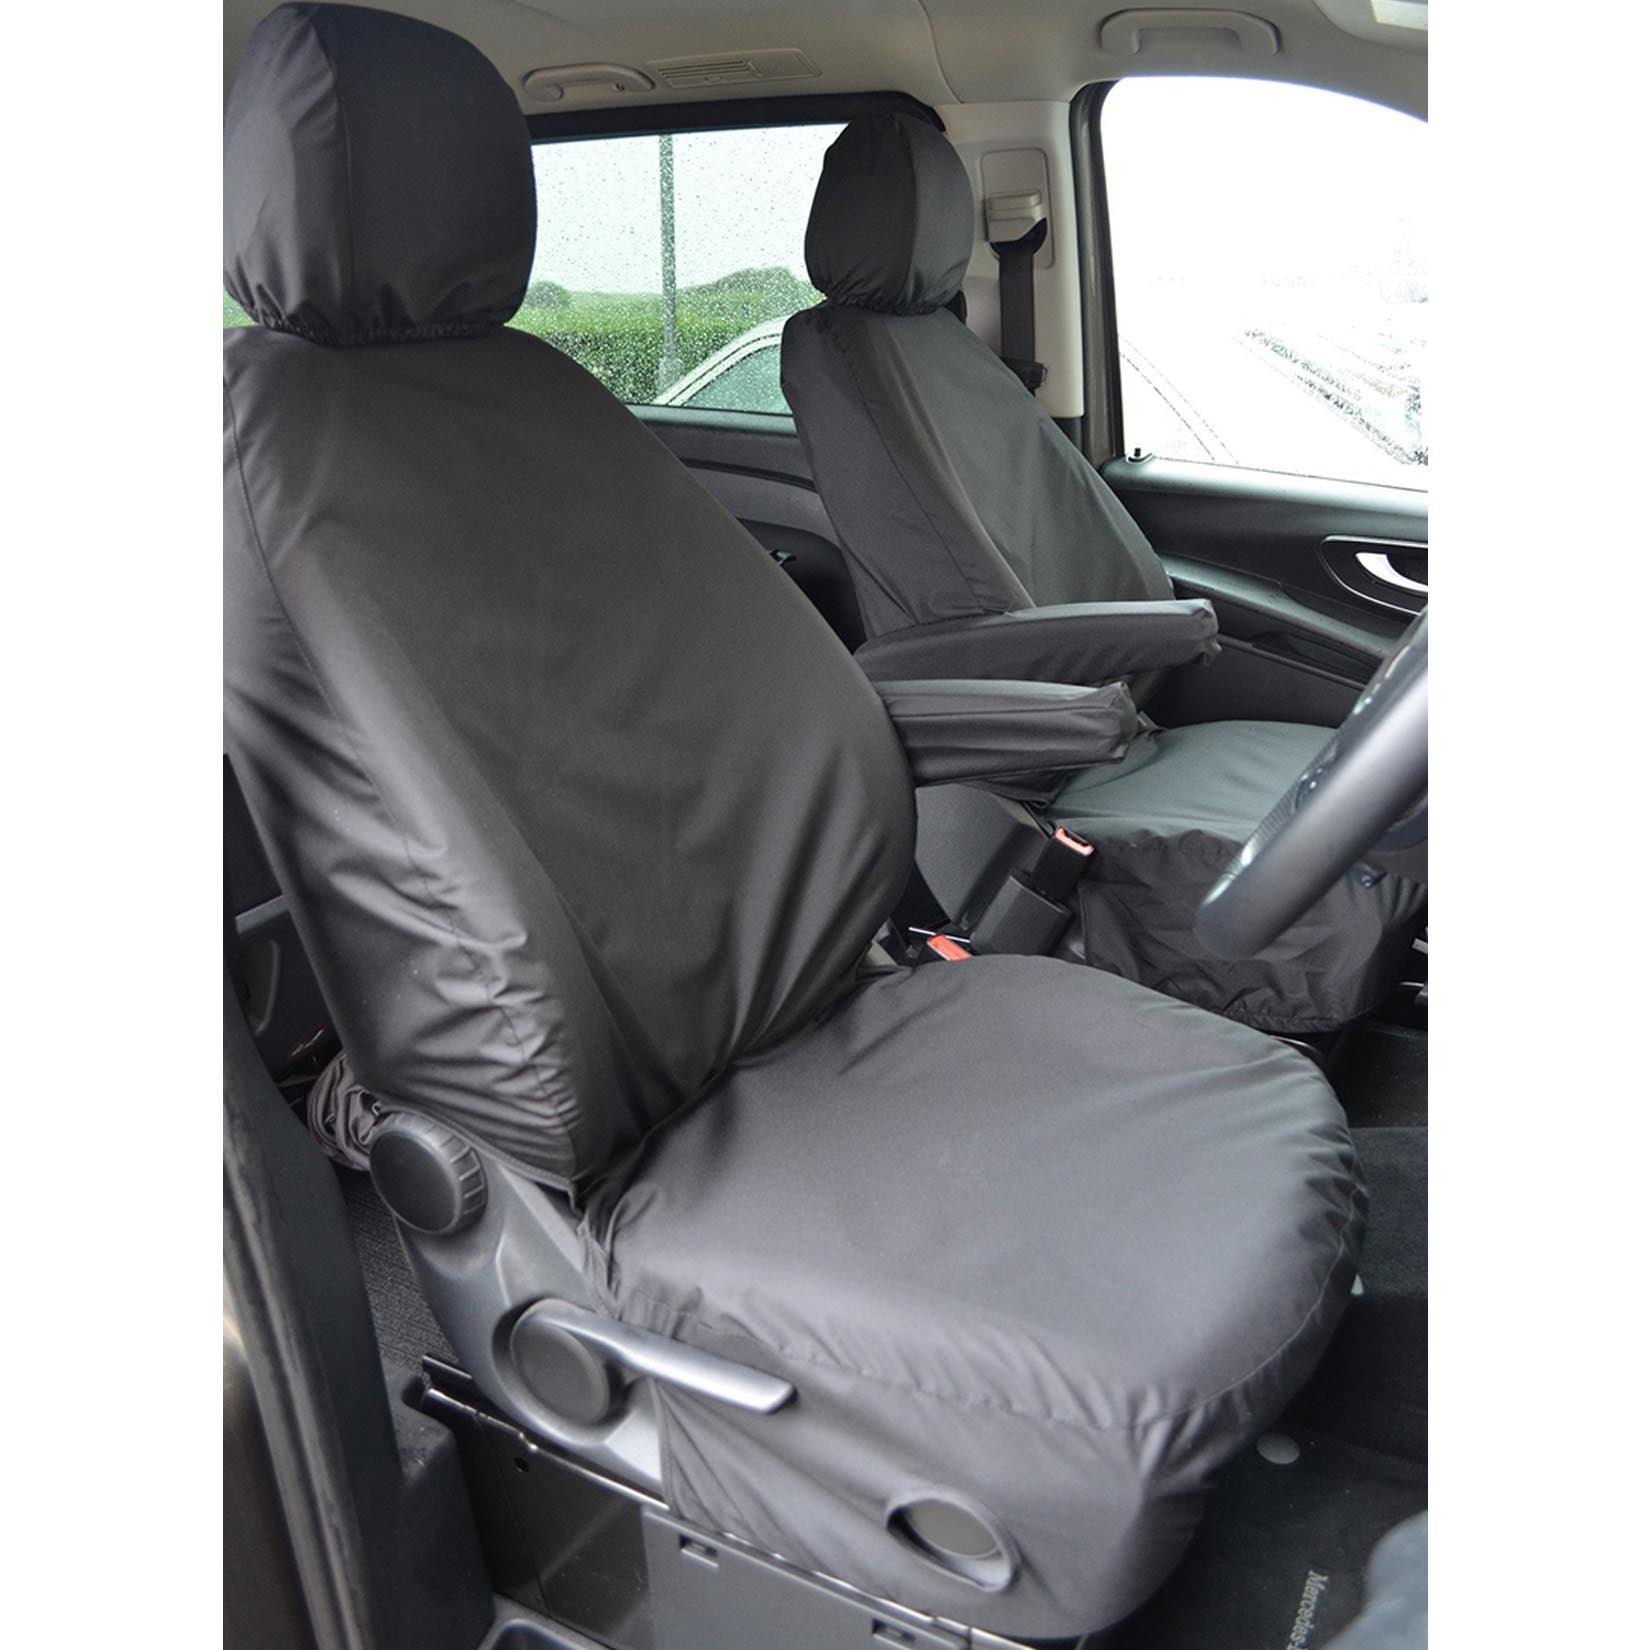 MERCEDES VITO 2015 ON FRONT SINGLE SEAT COVERS - BLACK - Storm Xccessories2